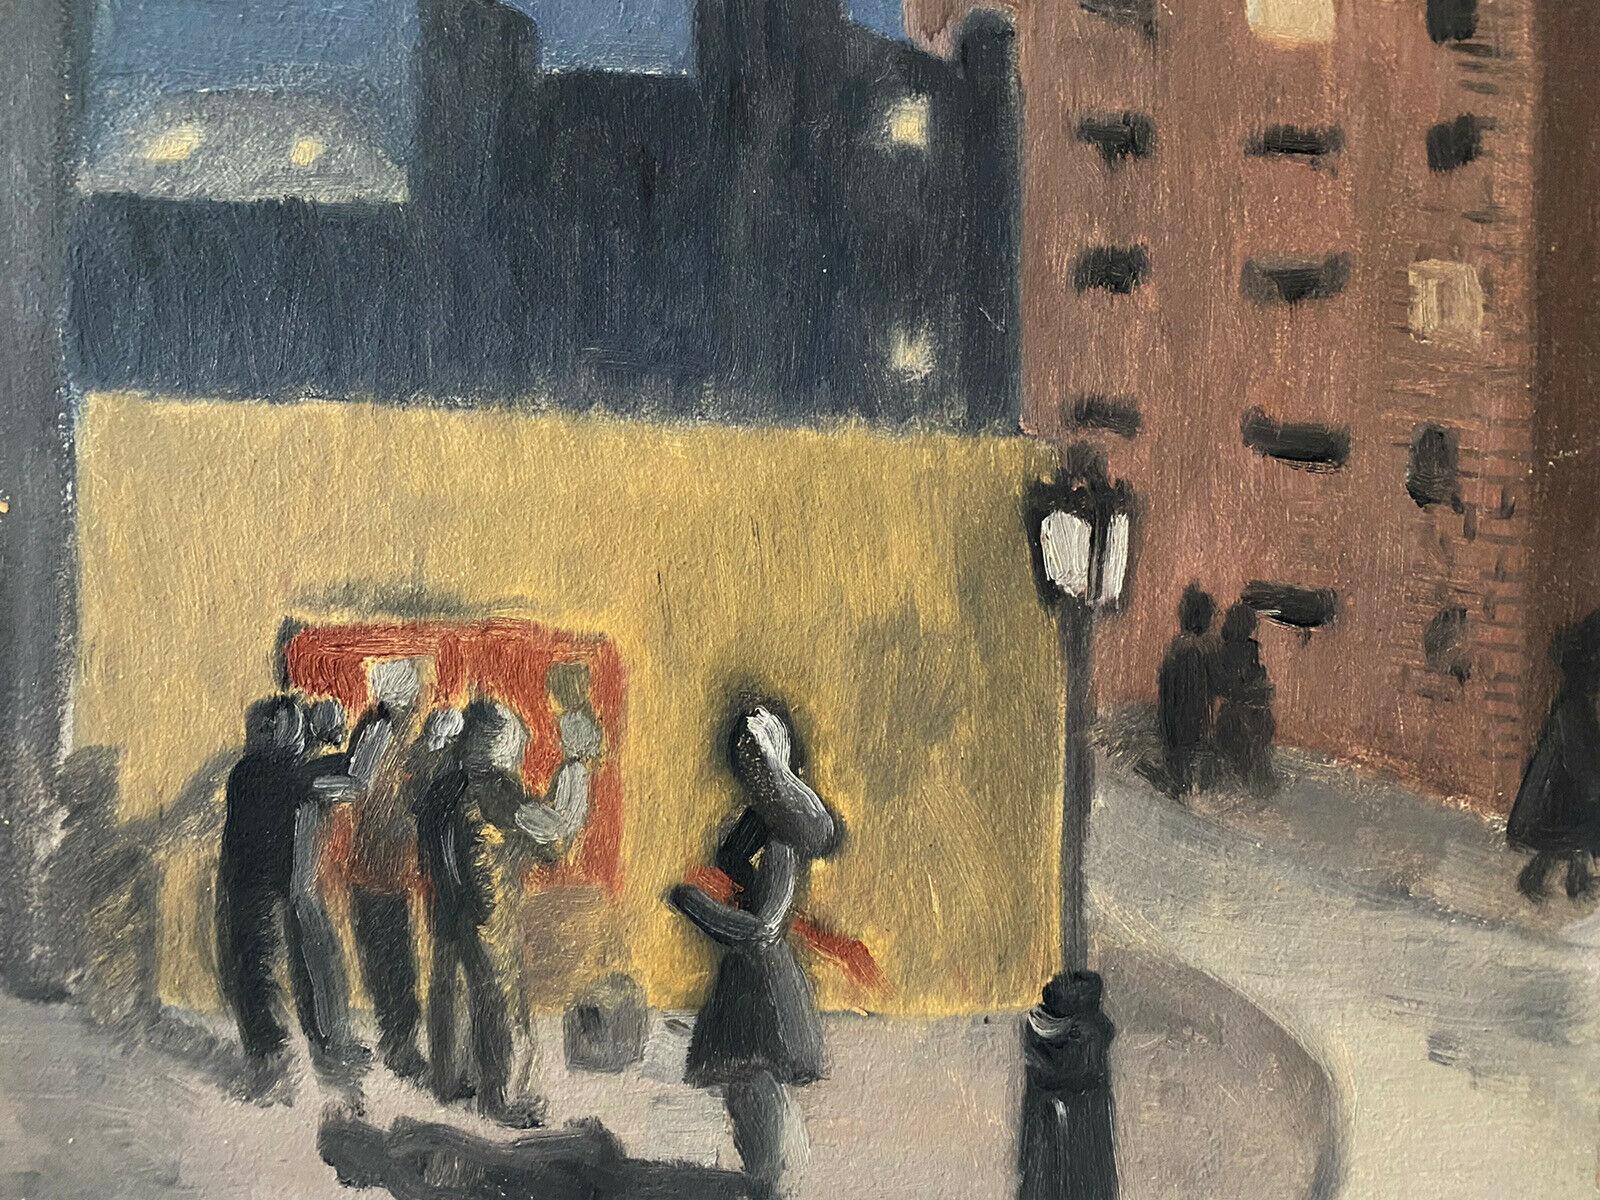 "Outside the Bar"
by Geneviève Zondervan (French 1922-2013)
oil painting on board, stamped verso

board: 8.5 x 10.5 inches

Superb original mid 20th century oil painting by the French artist, Geneviève Zondervan (French 1922-2013). The painting has